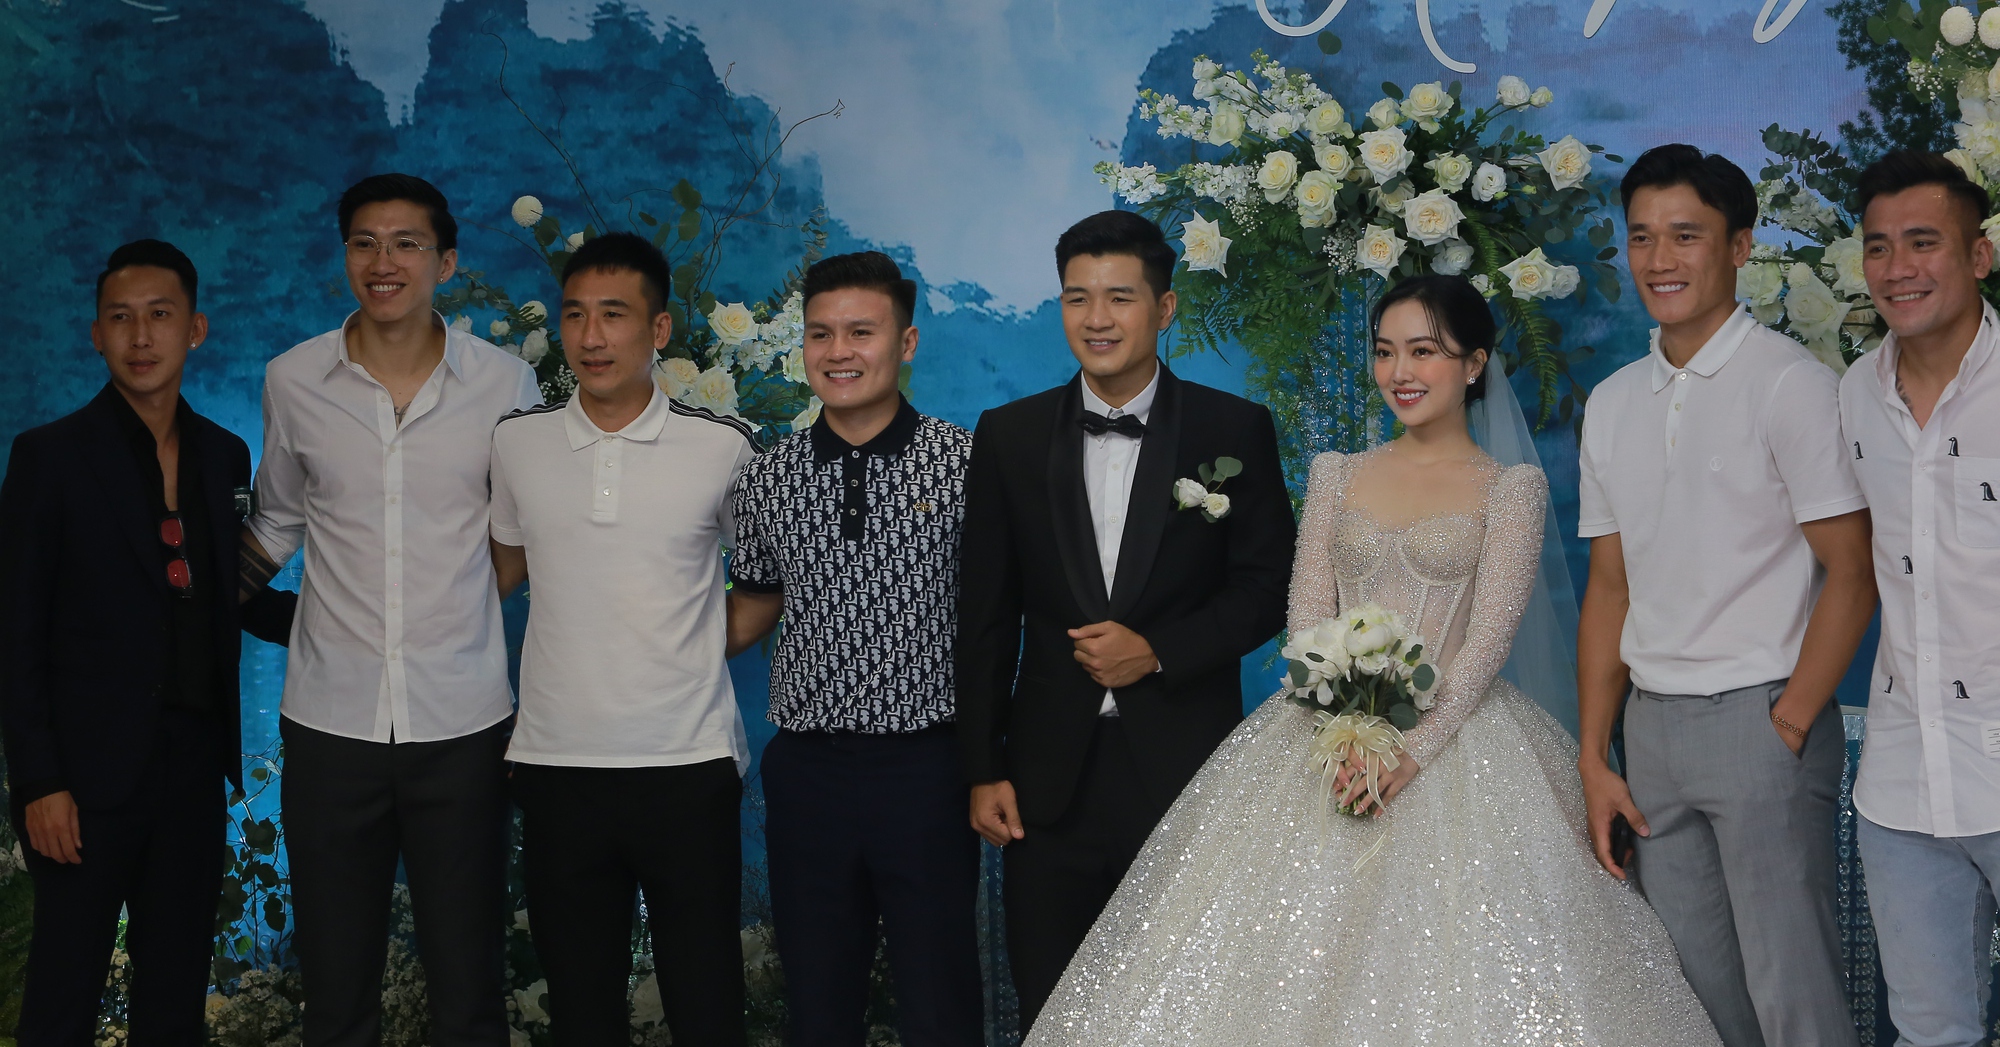 “Extreme” guests at Ha Duc Chinh’s wedding